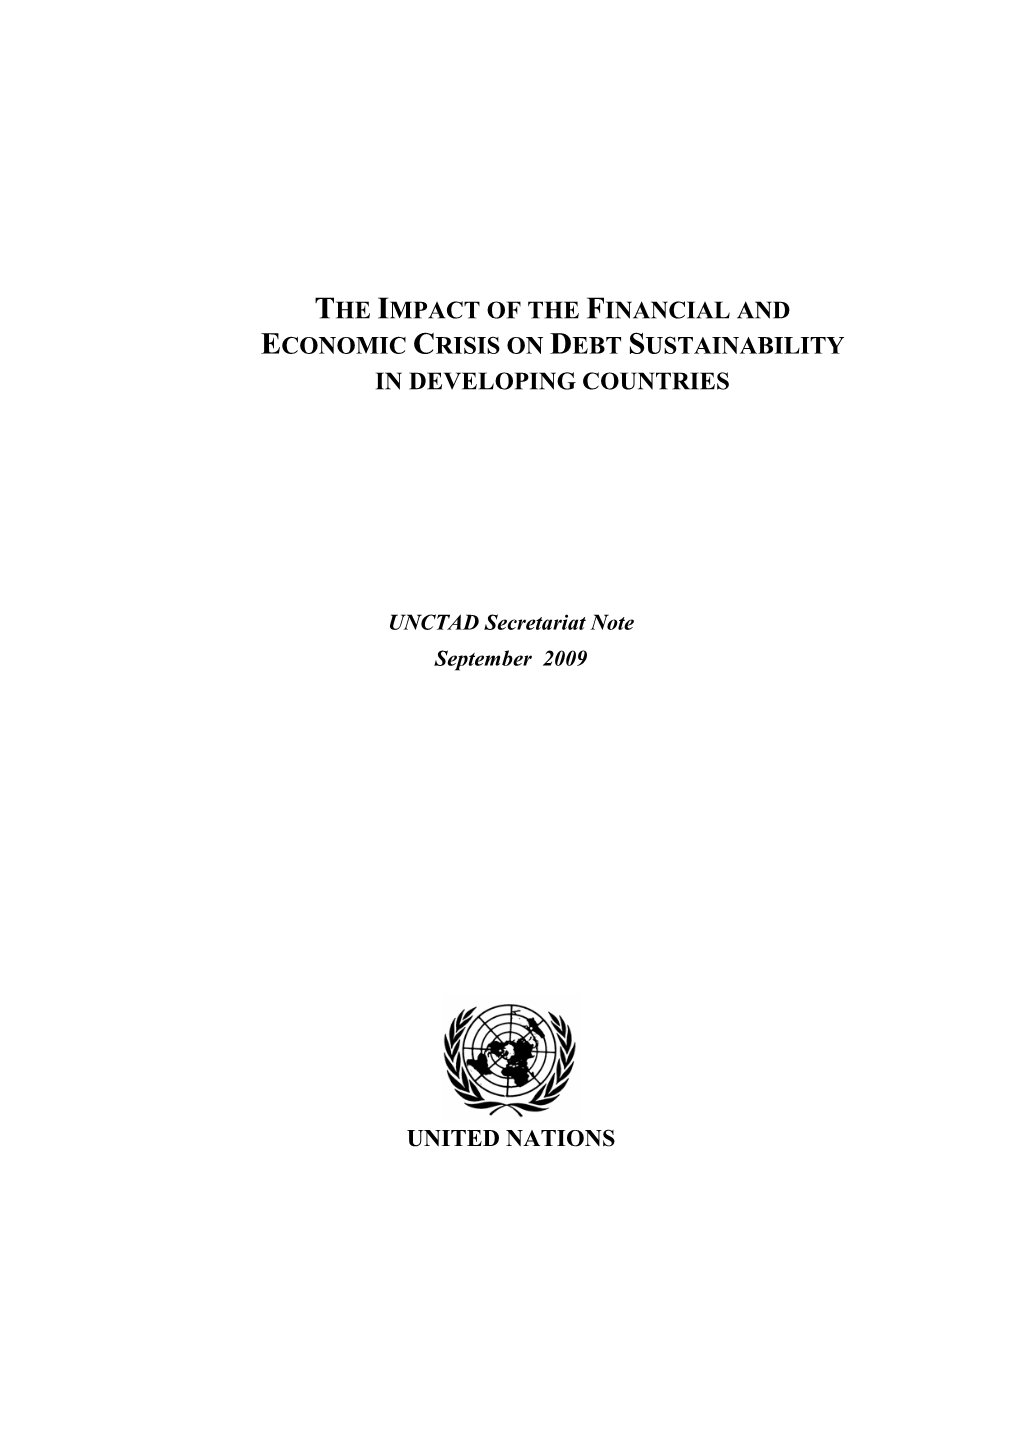 The Impact of the Financial and Economic Crisis on Debt Sustainability in Developing Countries